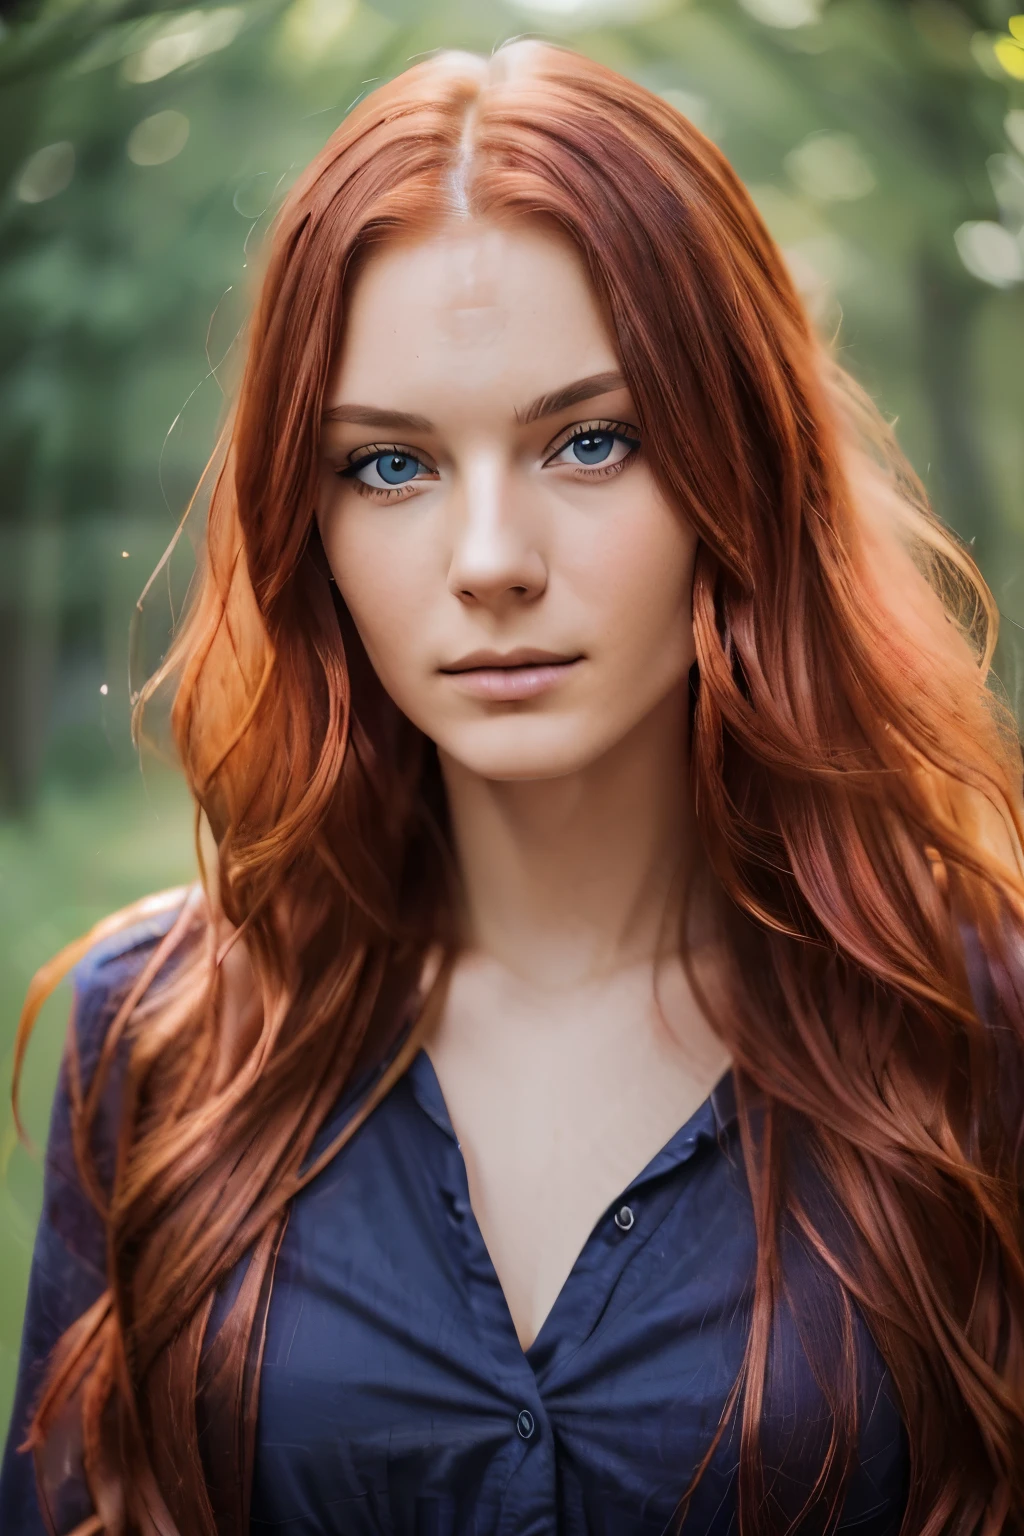 (best qualityer, ultra detali, realisitic:1.37), 23 year old Swedish woman, red dyed hair, medium length extremely wavy layered hairstyle, shining blue eyes, high cheekbones, pale skin tone, Shot on a Canon EOS R6 Mark II camera, he finished, looking over his shoulder
